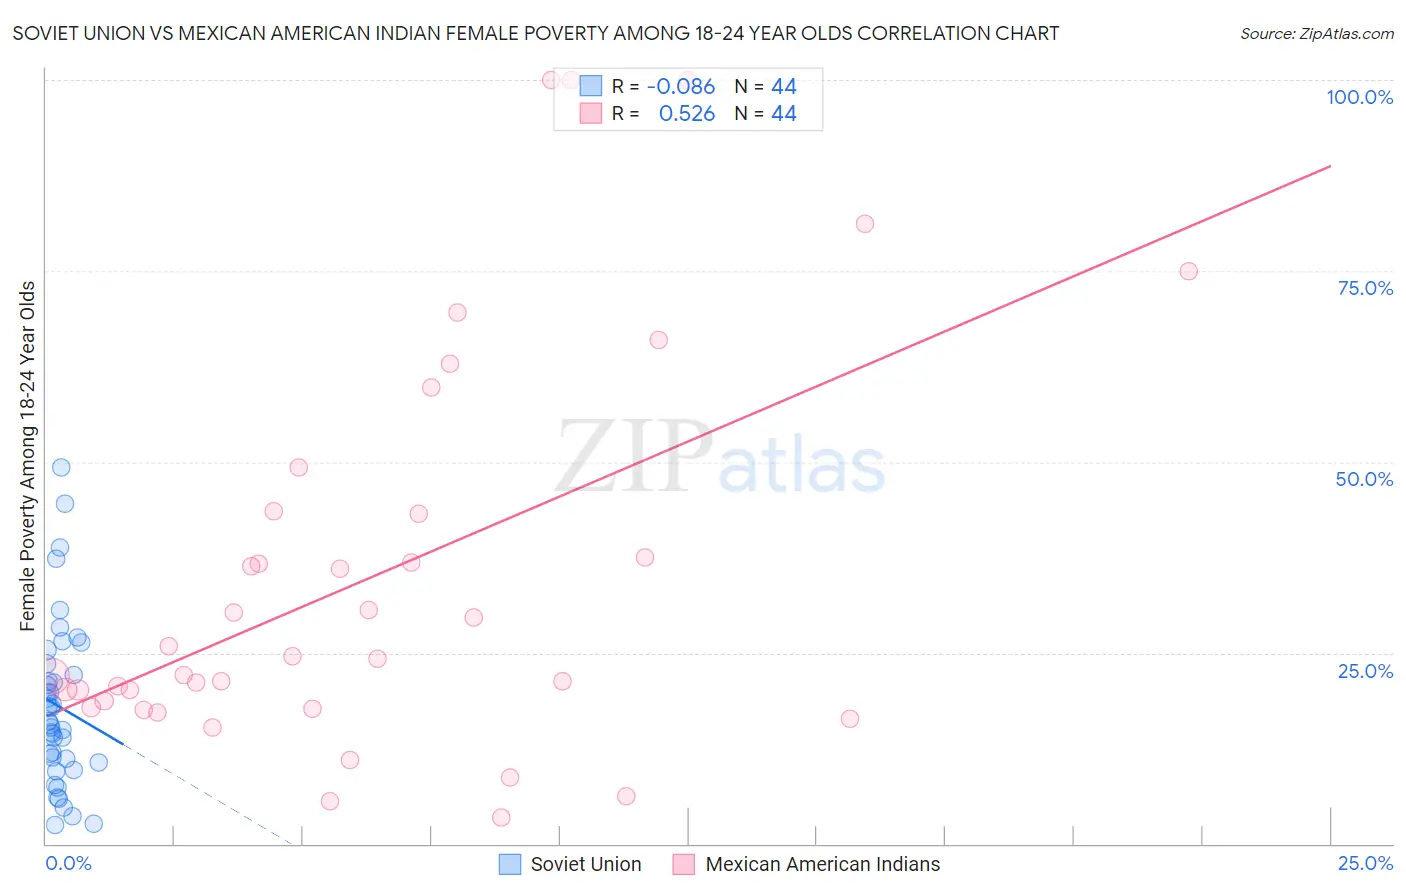 Soviet Union vs Mexican American Indian Female Poverty Among 18-24 Year Olds